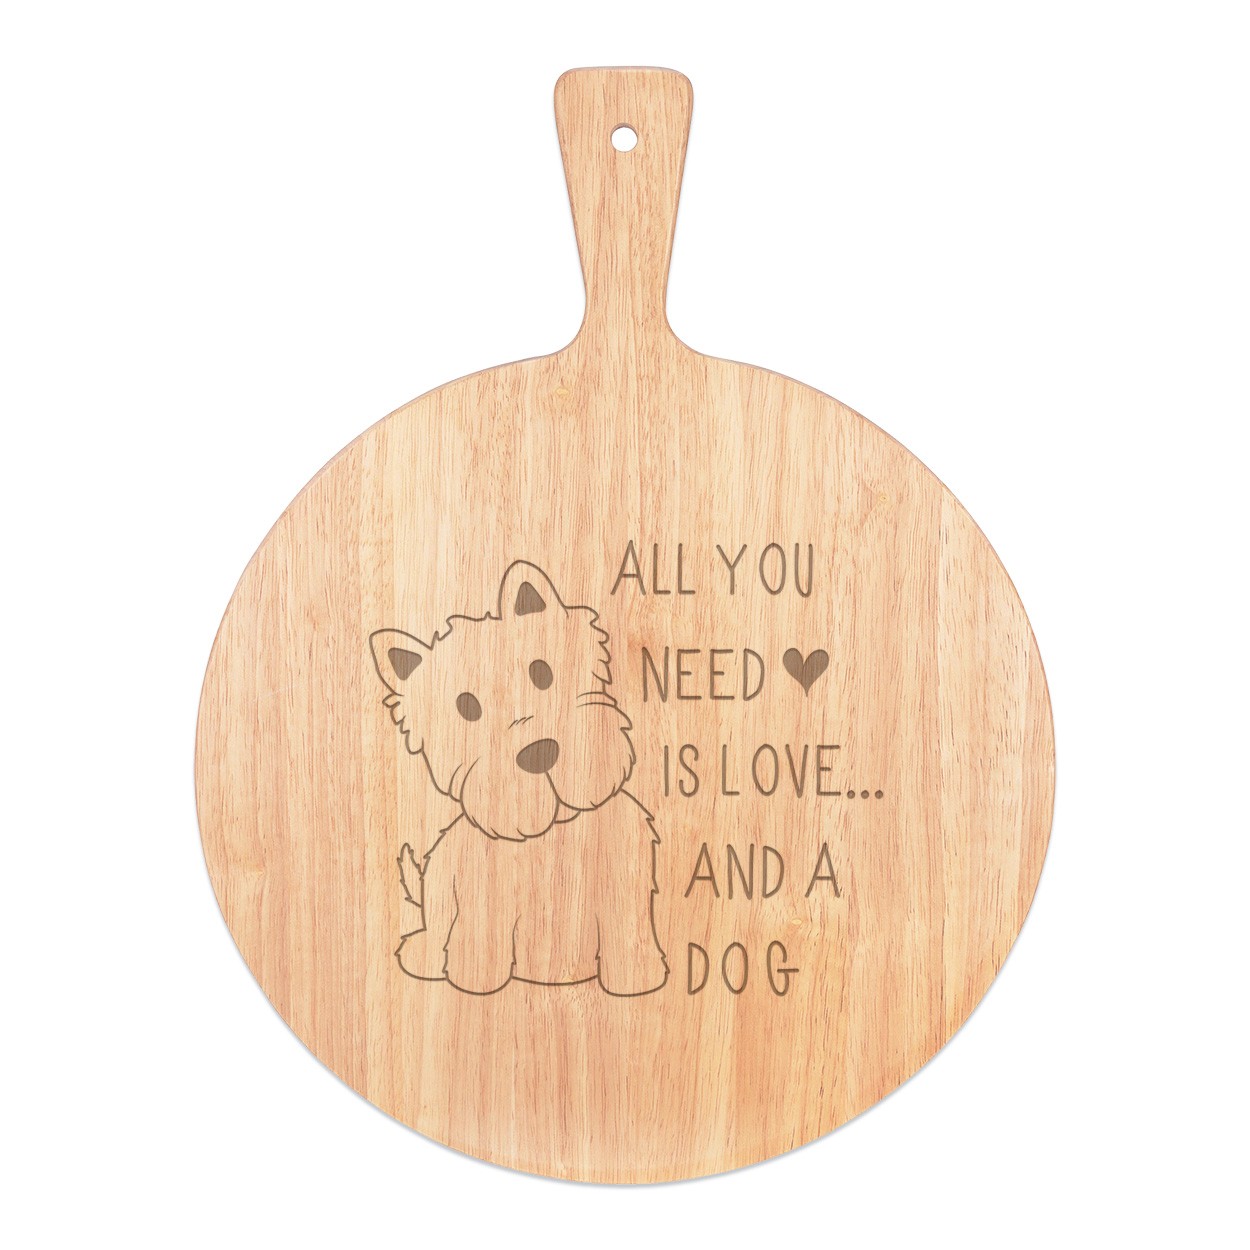 All You Need Is Love And A Dog Pizza Board Paddle Serving Tray Handle Round Wooden 45x34cm